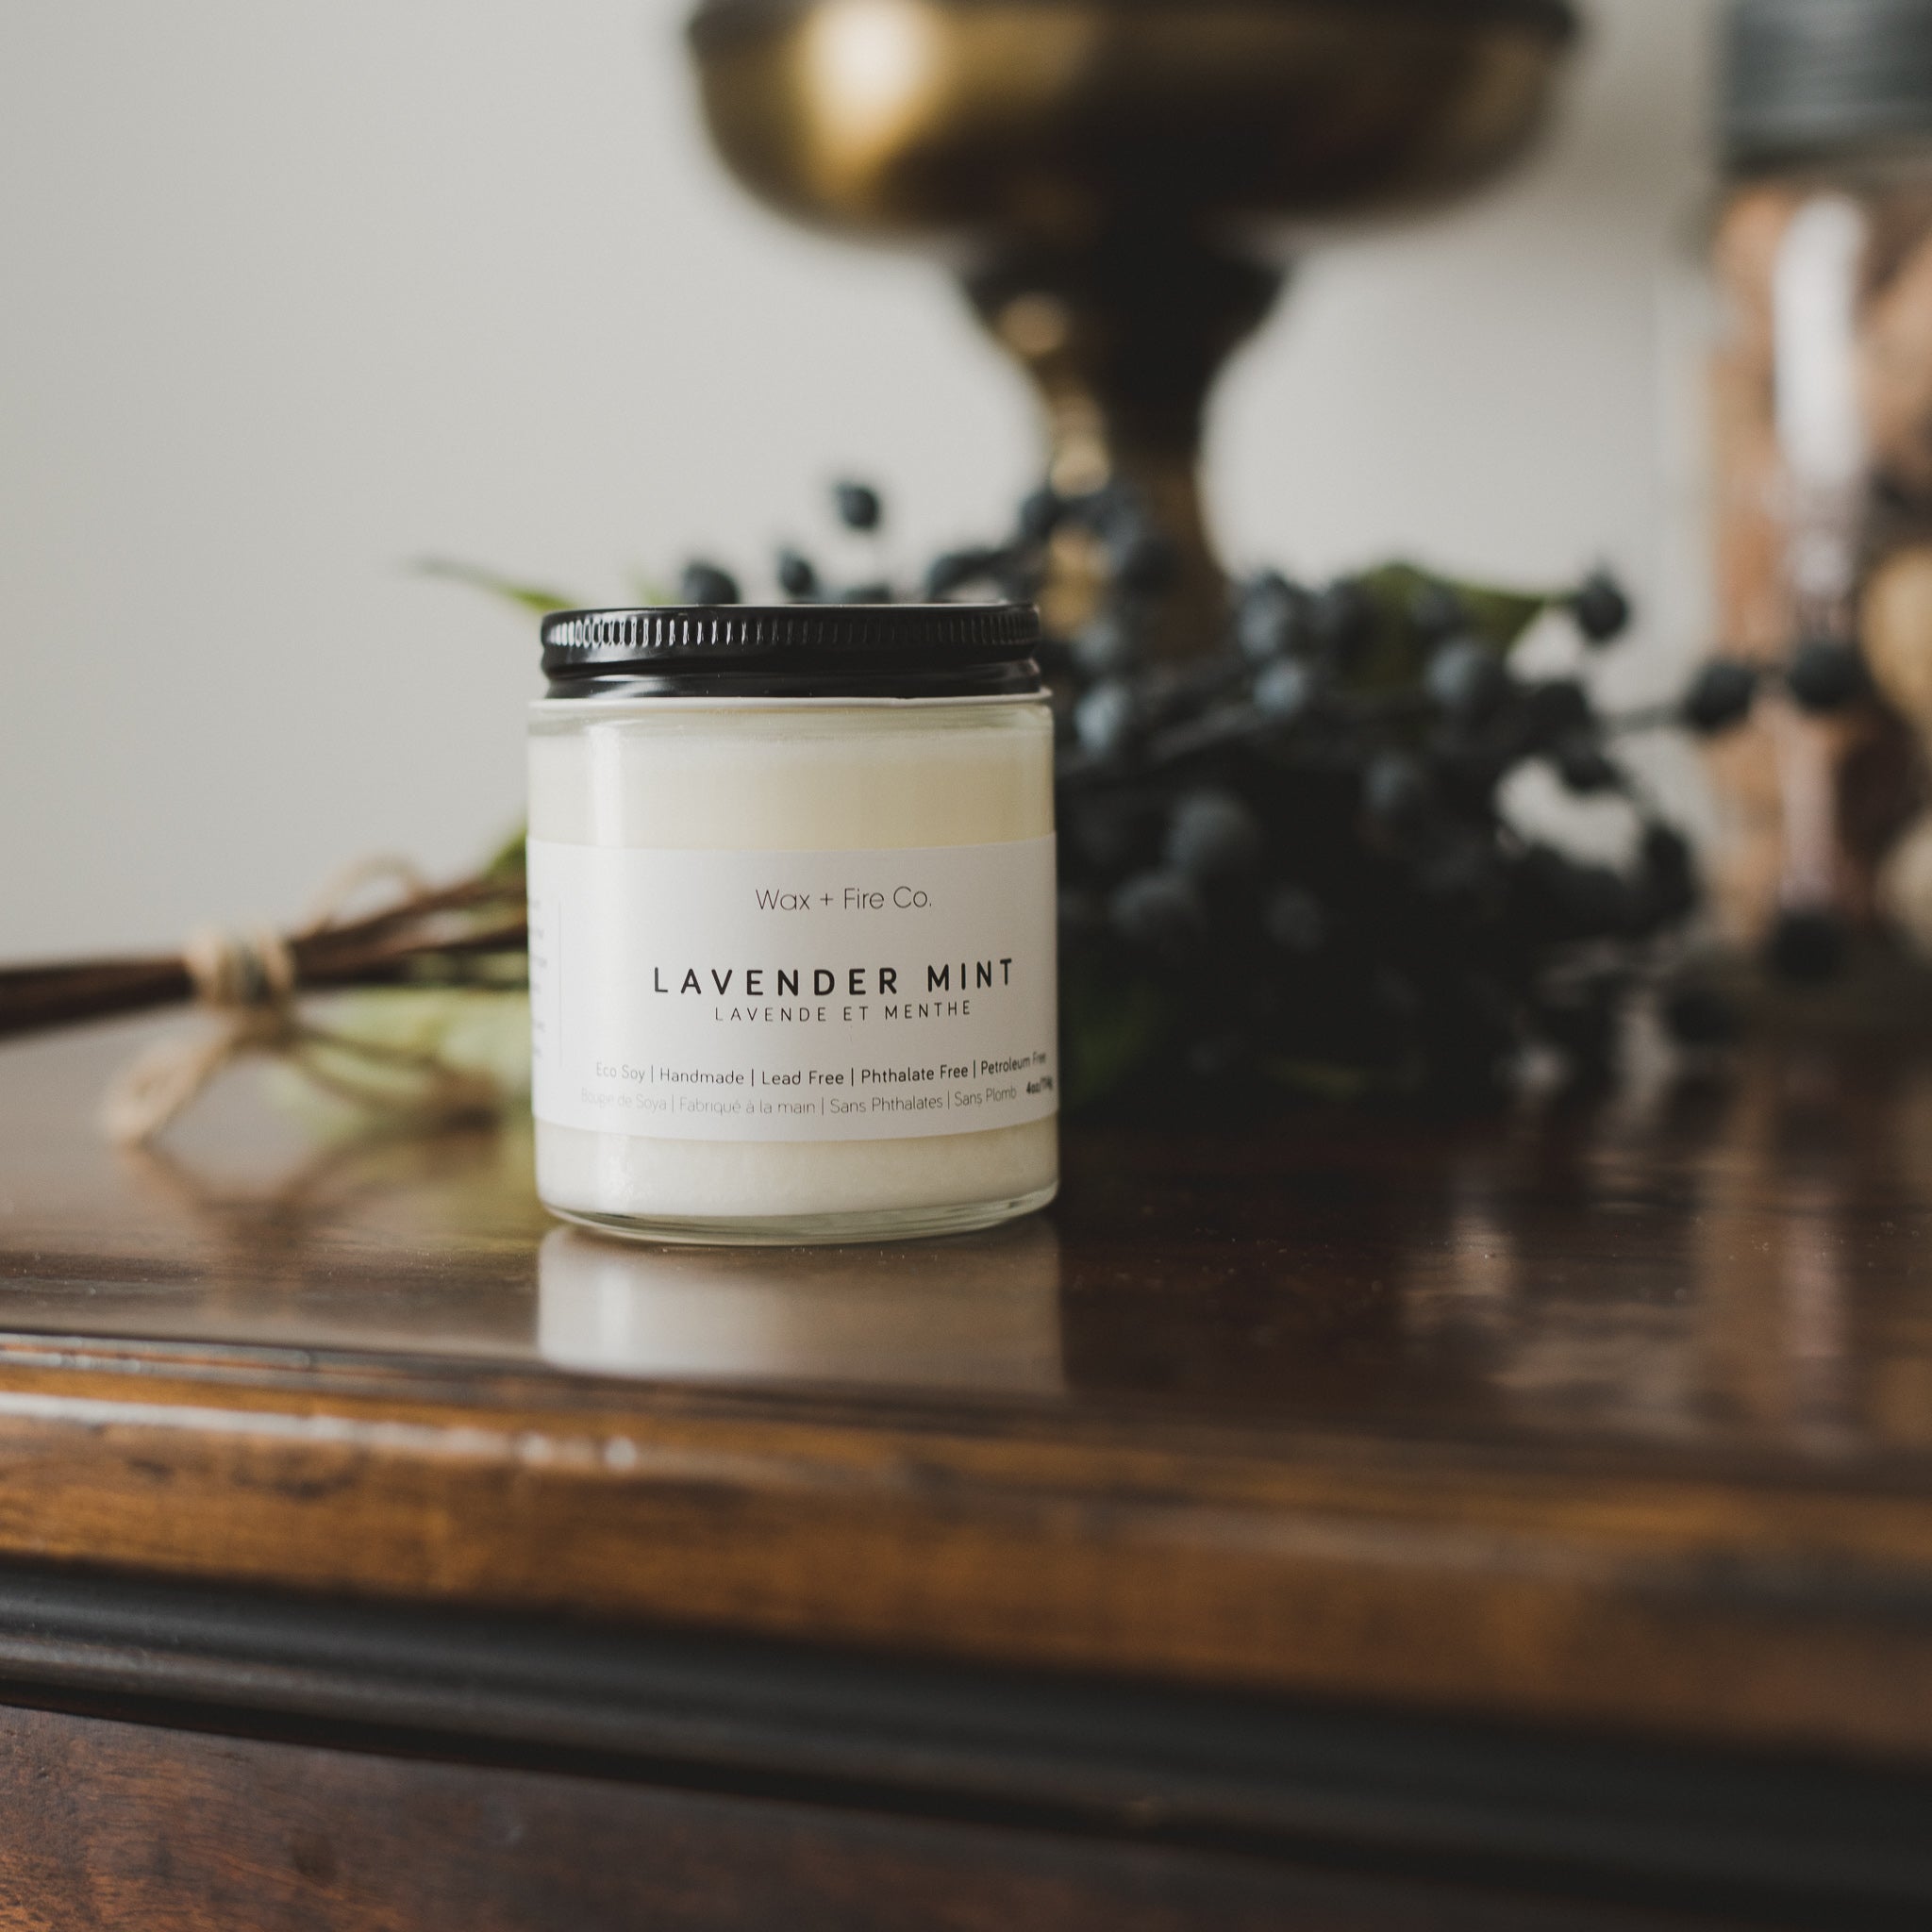 Lavender Mint Soy Wax Candle. Handmade and hand poured in Canada. Eco-friendly soy wax candle. 